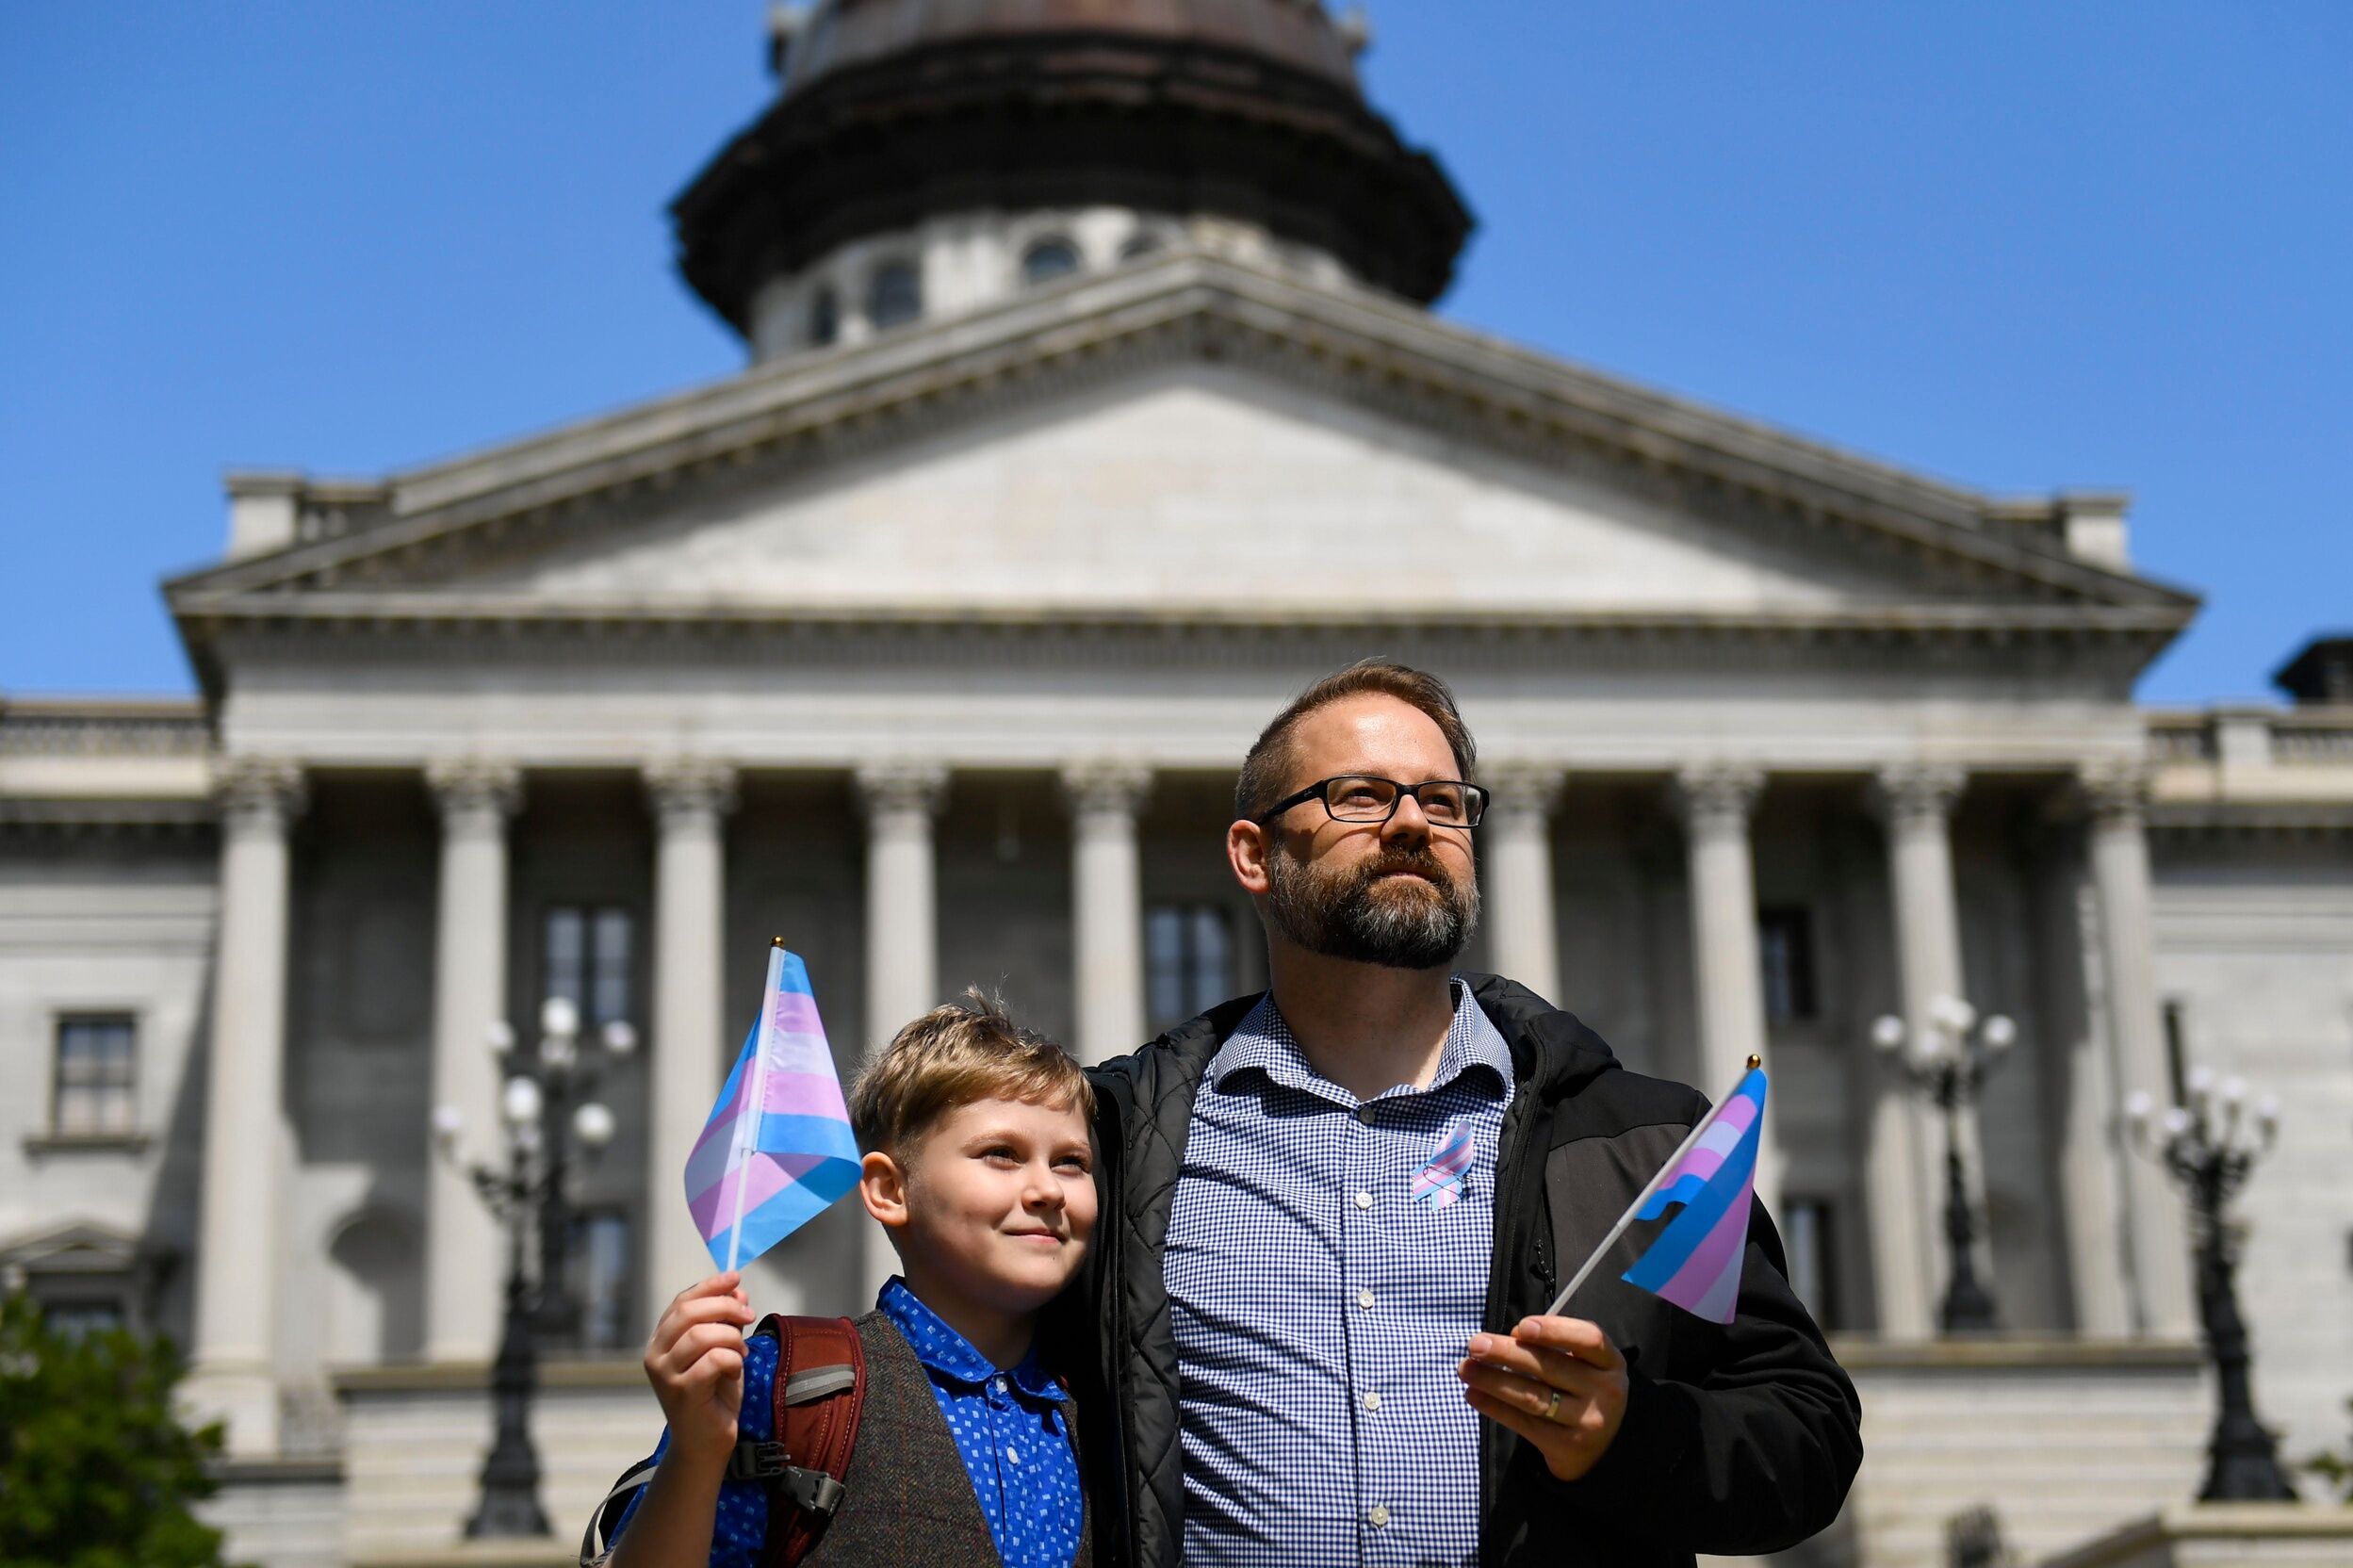 Dylan Dittrich-Reed and his son, Niko, pose for a portrait outside of the S.C. Statehouse on Wednesday, March 29, 2023. Dittrich-Reed is worried he will have to move his family out of state if they cannot get gender-affirming health care for his son.